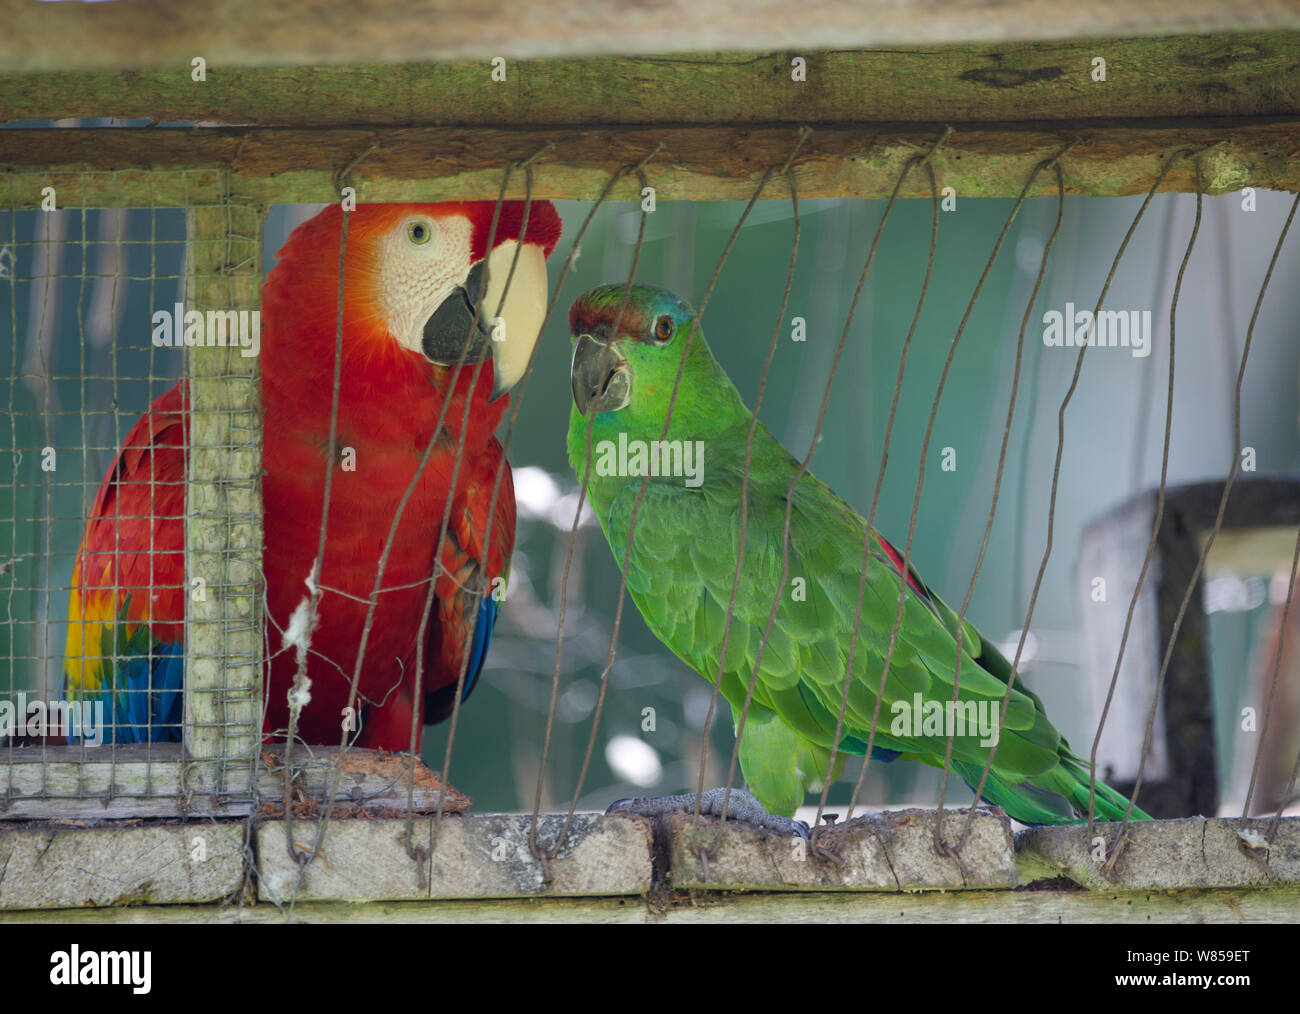 Scarlet Macaw (Ara macao) and Festive Parrot (Amazona festiva), caged, in village on Amazon river. Peru Stock Photo